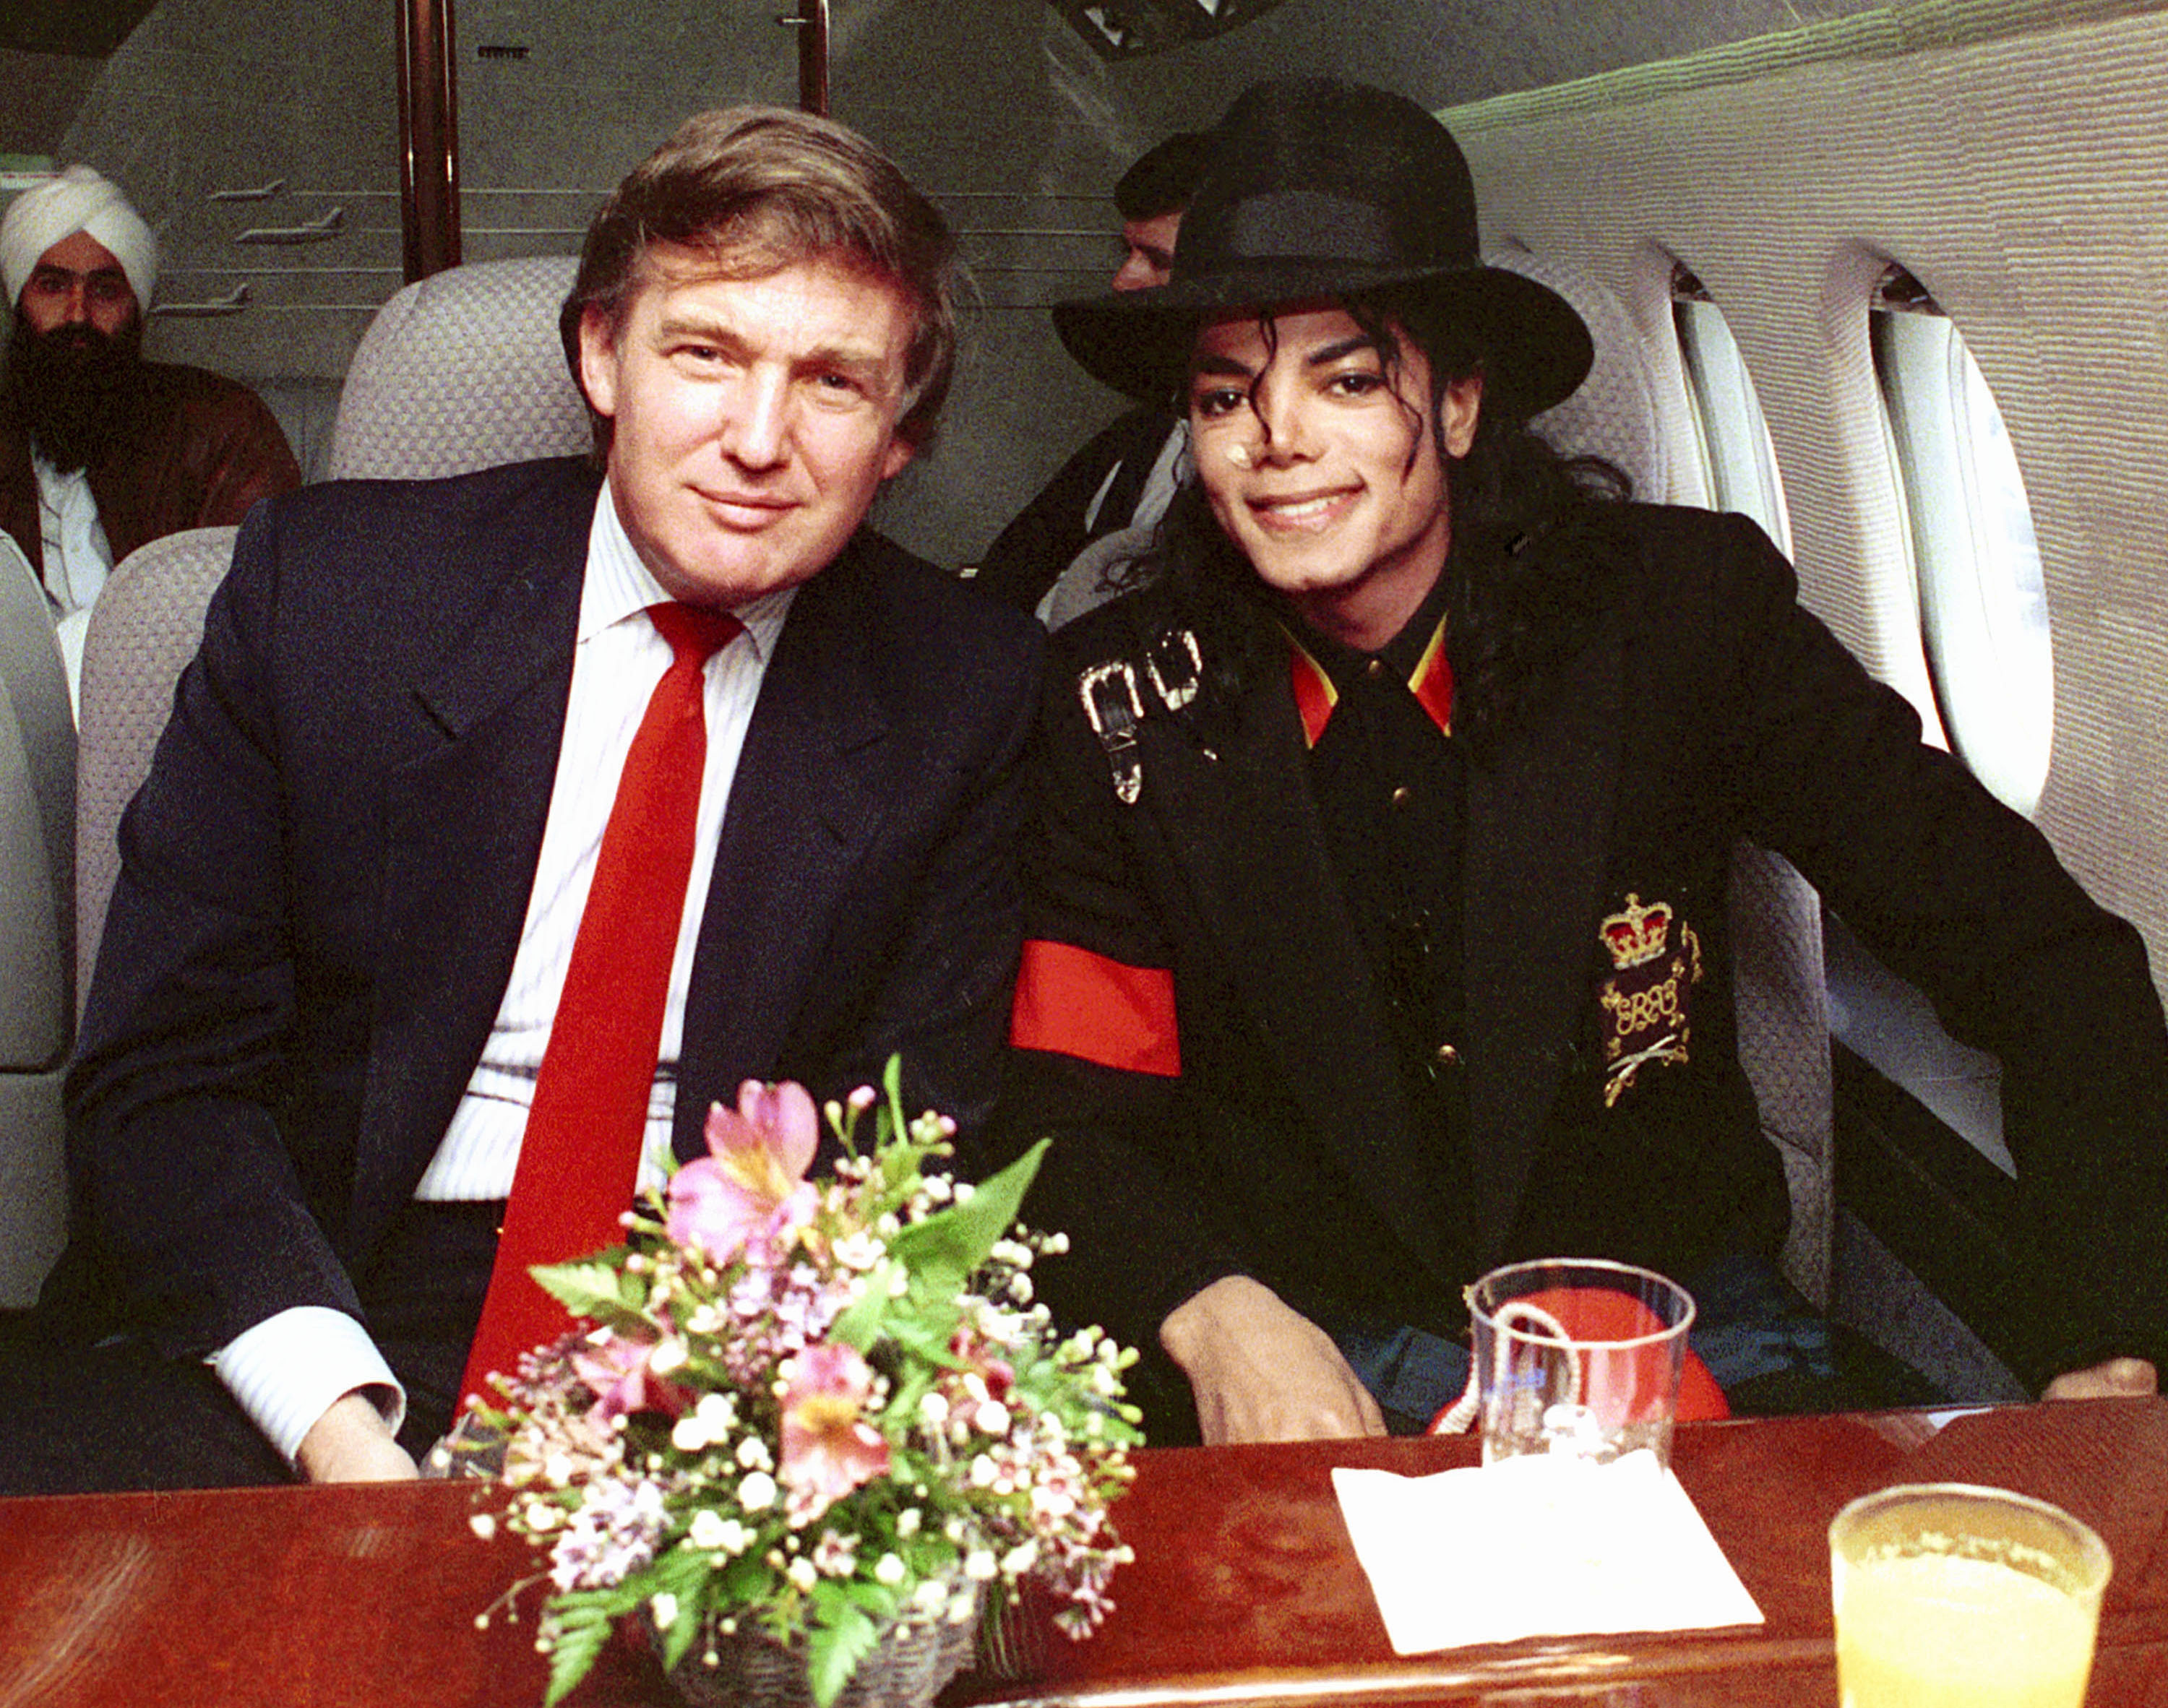 Michael Jackson and Donald Trump Await Take-off for their Visit to Child AIDS Patient Ryan White